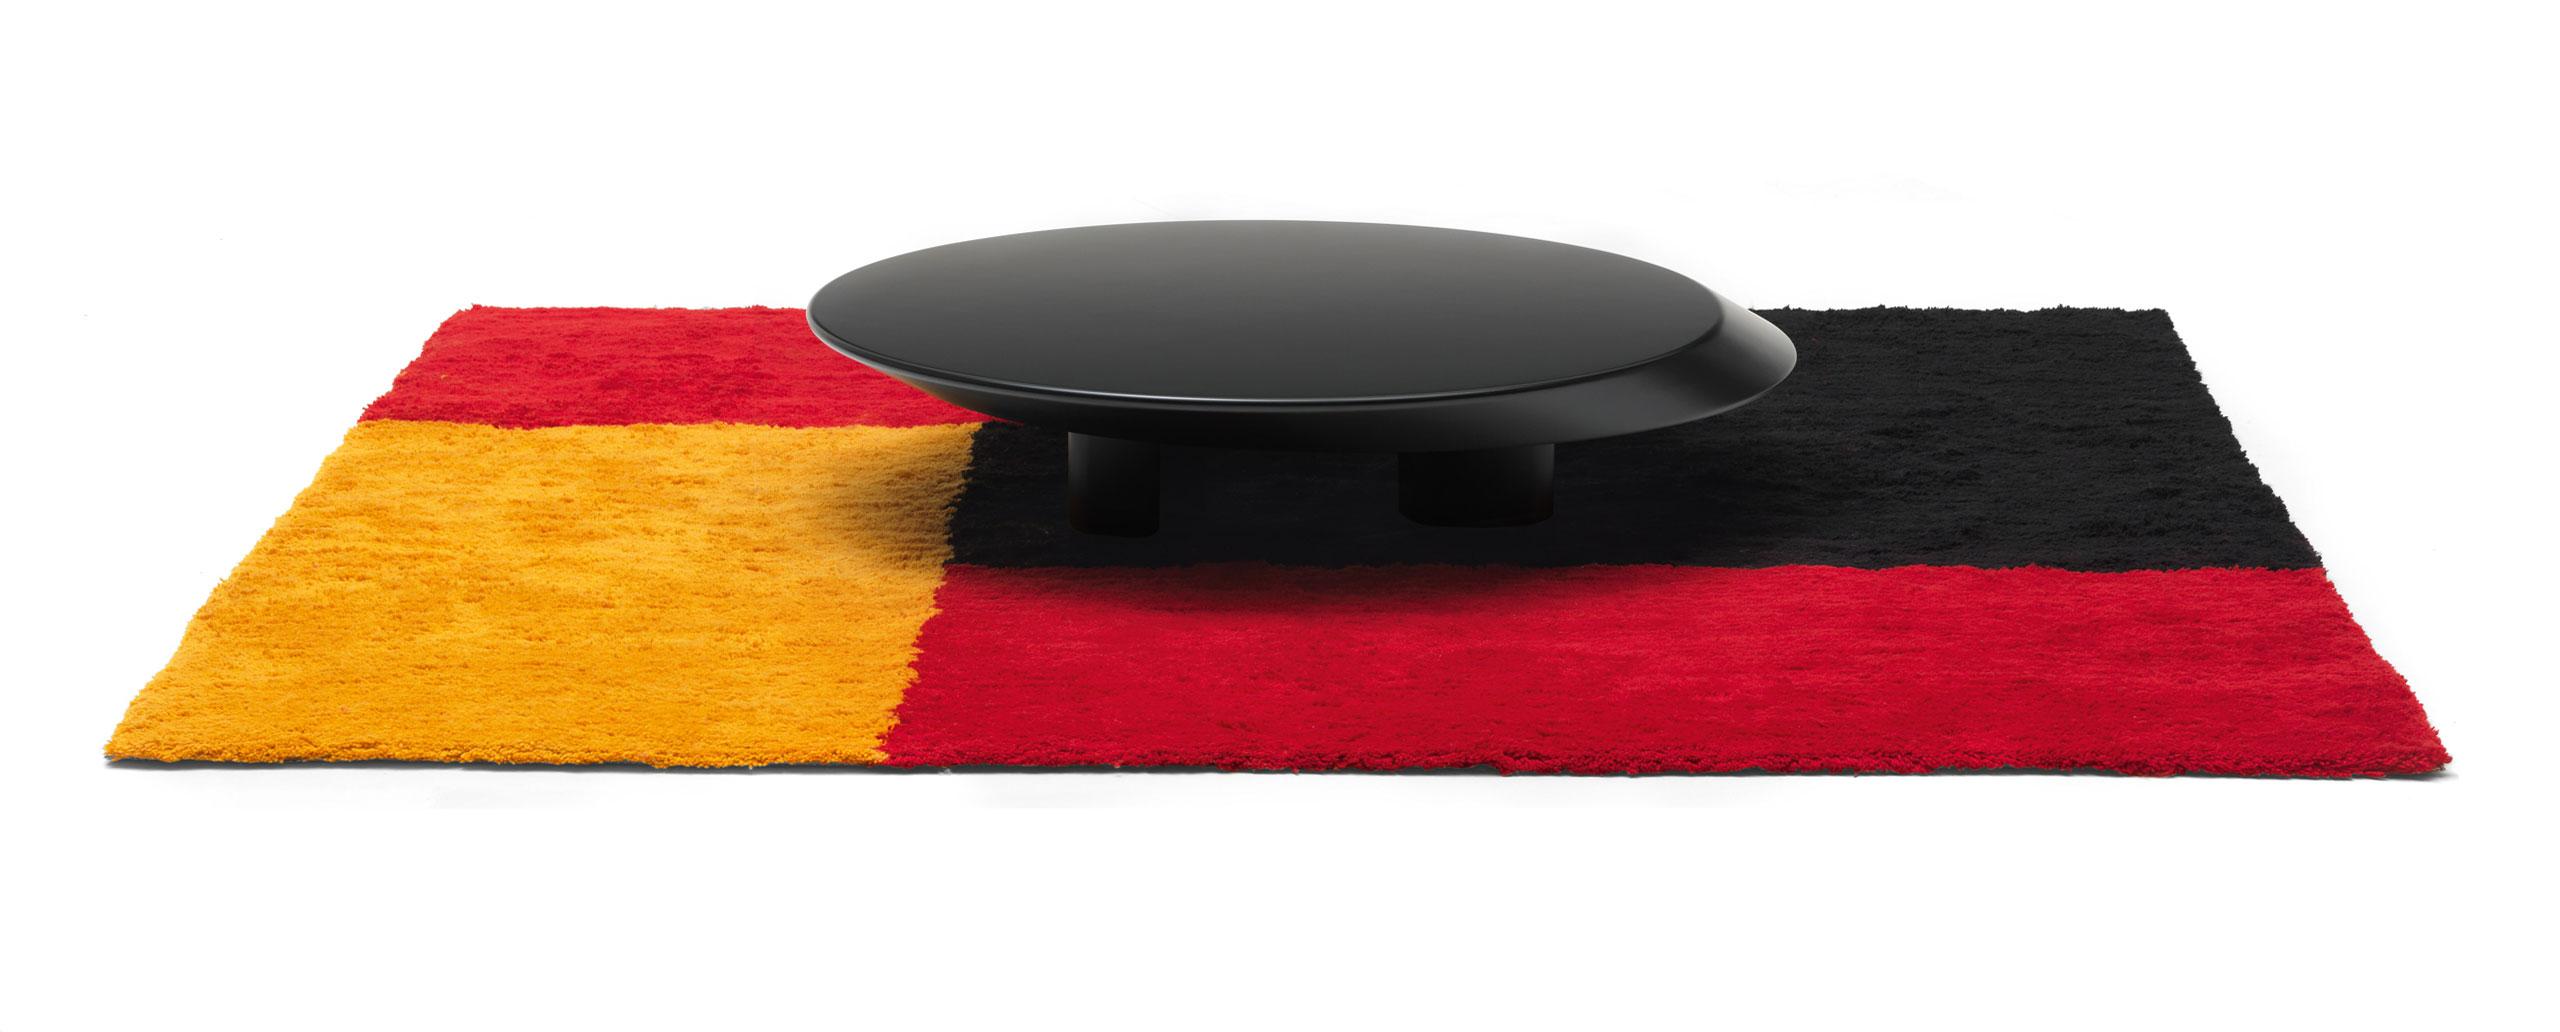 Mid-Century Modern Charlotte Perriand Accordo Low Table, Mat Black Lacquered Wood by Cassina